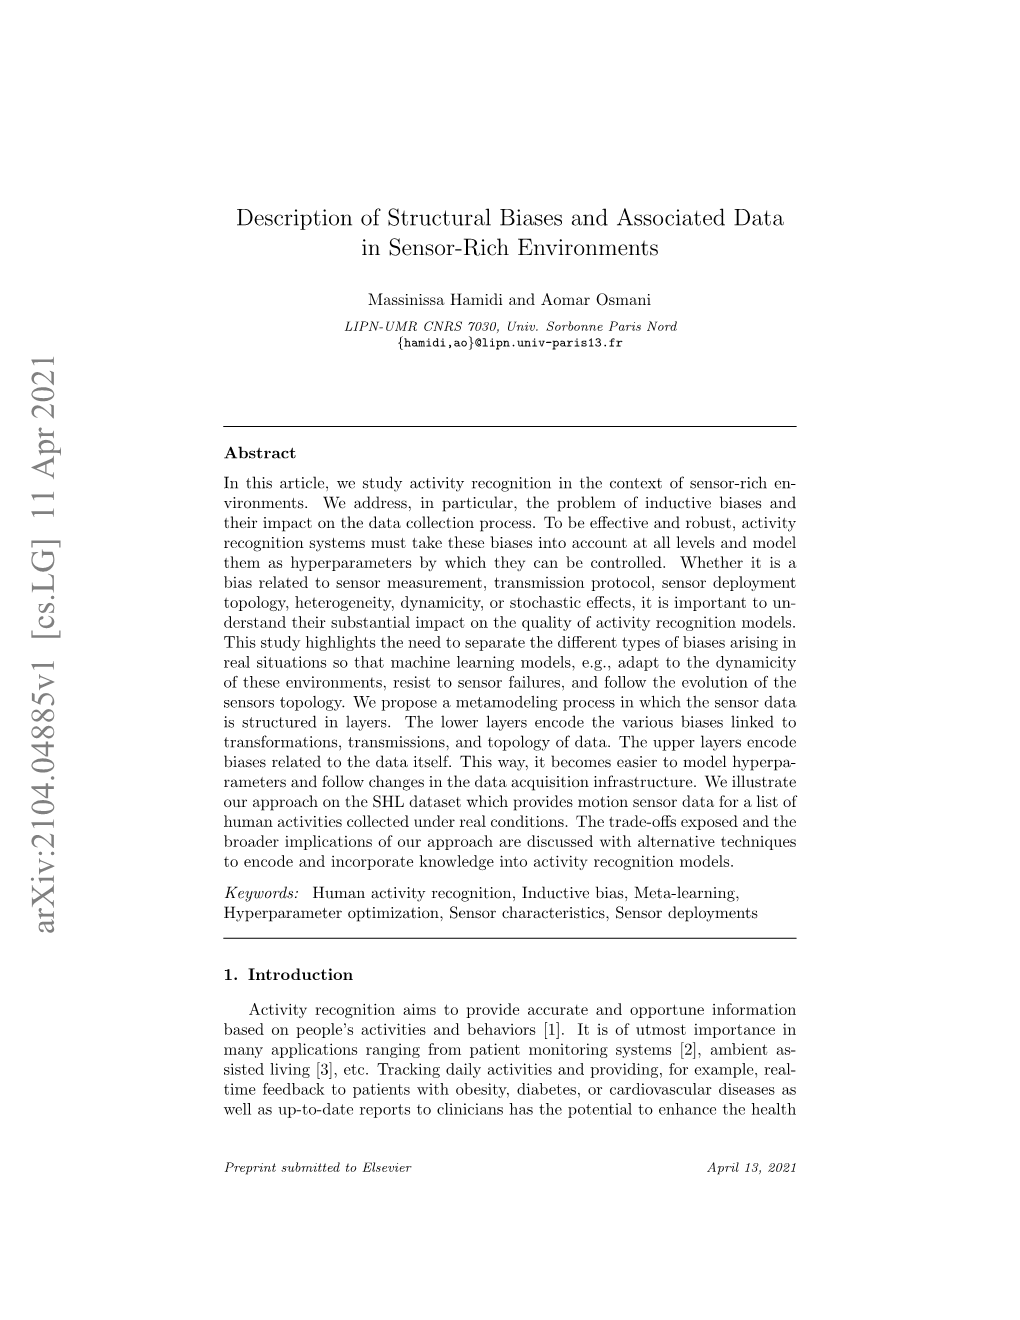 Description of Structural Biases and Associated Data in Sensor-Rich Environments